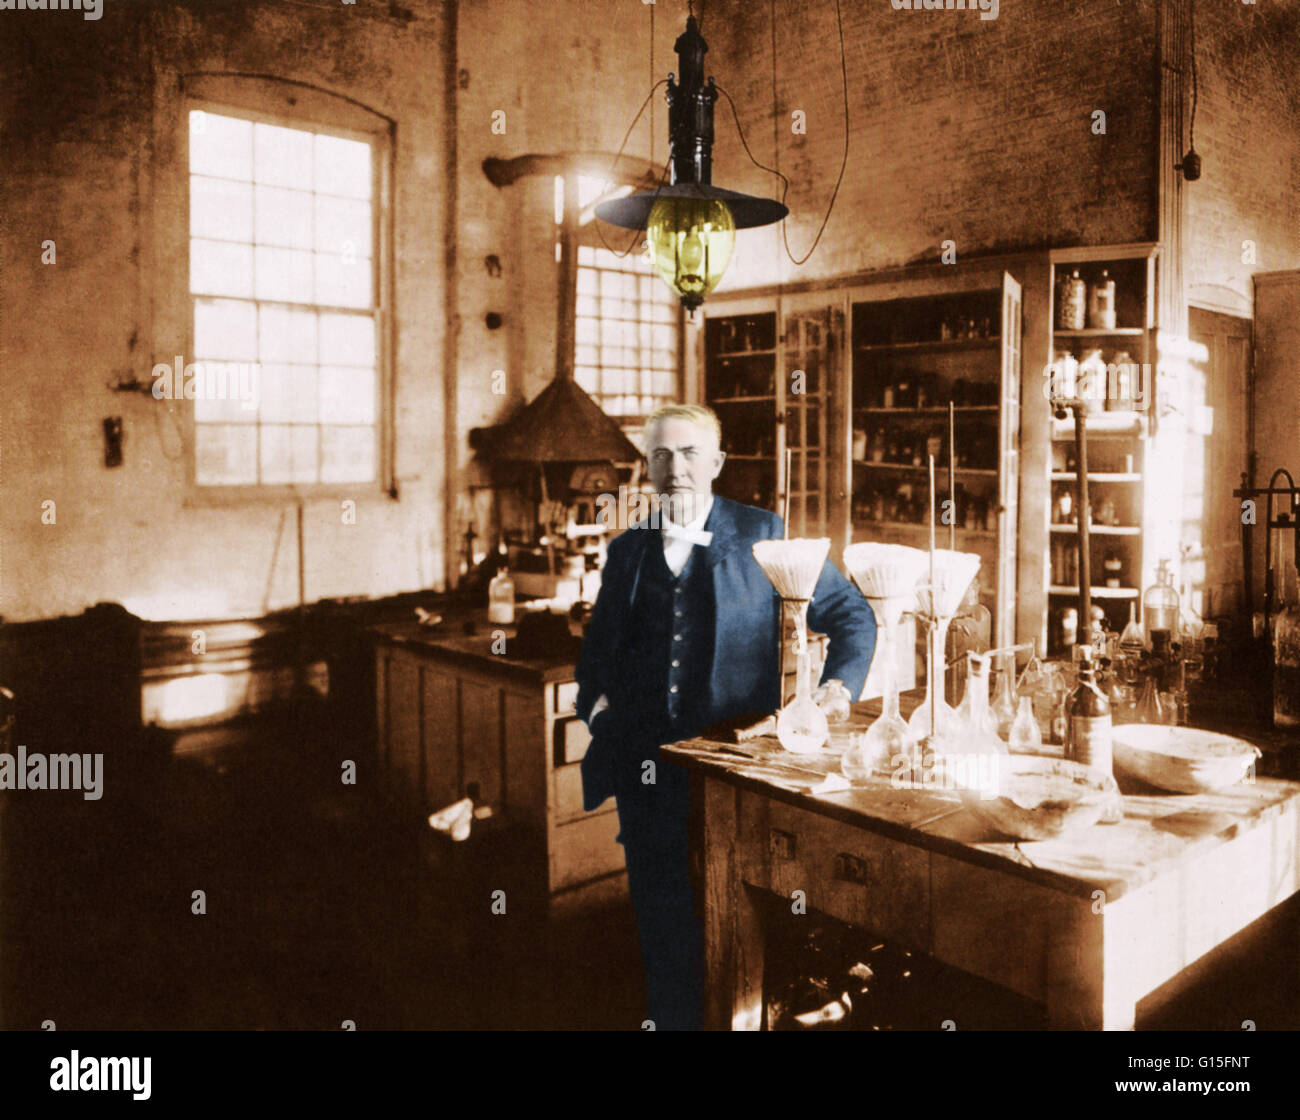 Edison in his laboratory in 1904. Thomas Alva Edison (1847-1931) was an American inventor and businessman. He developed many devices that greatly influenced life around the world, including the phonograph, the motion picture camera, and a long-lasting, pr Stock Photo